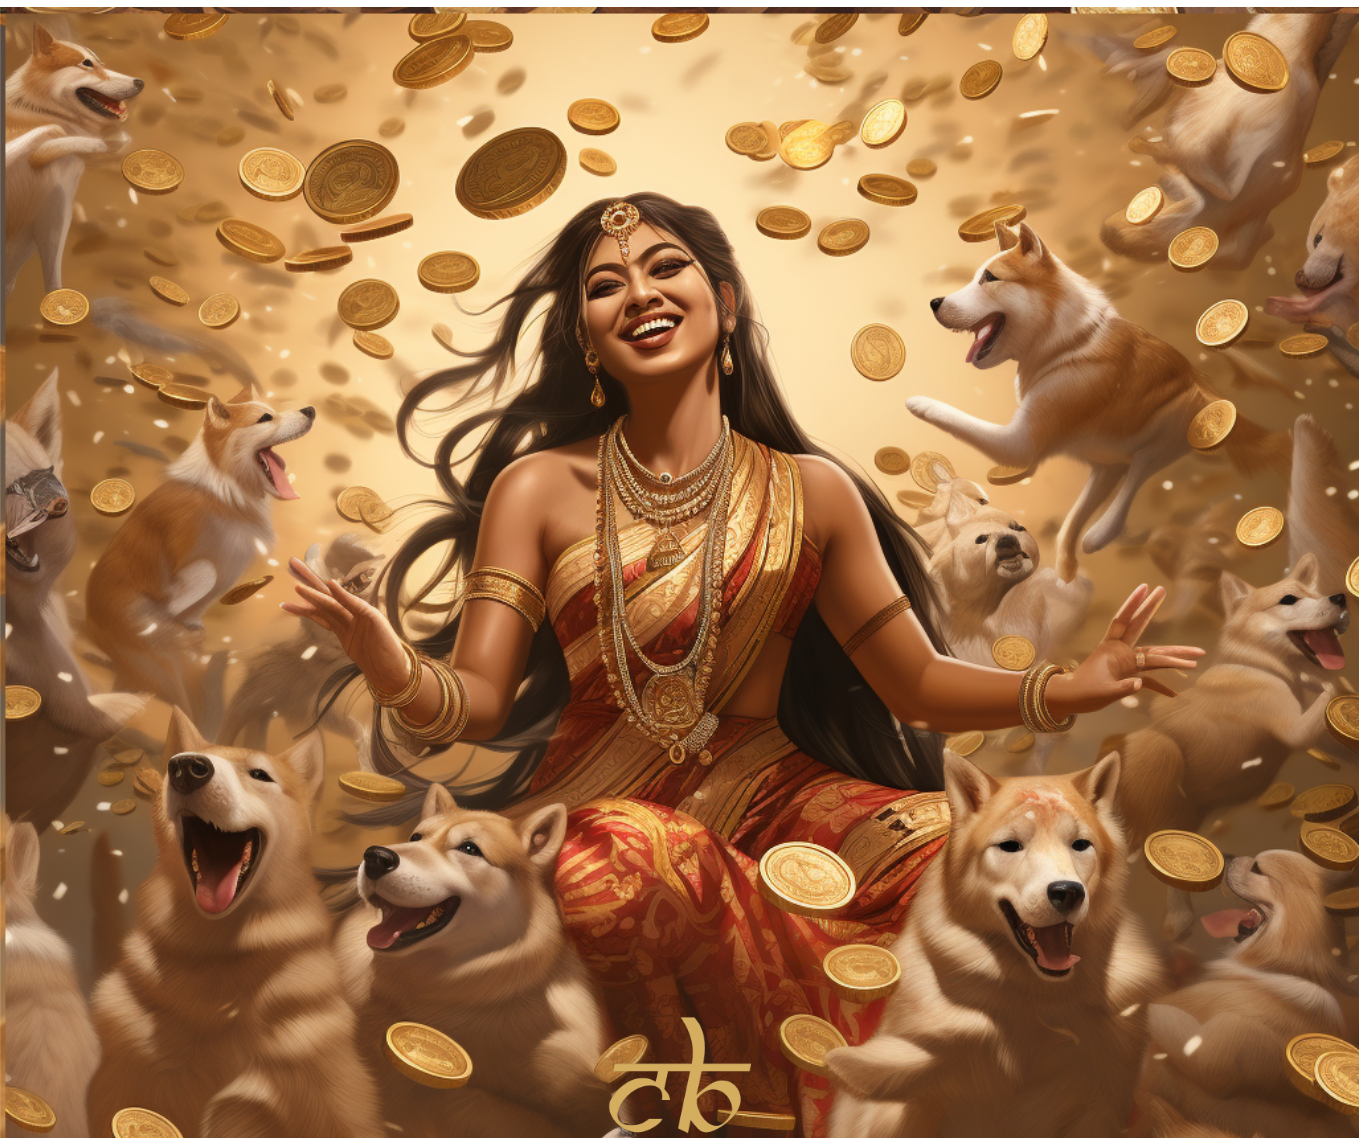 CoinBharat artwork of a beautiful goddess-like figure, surrounded by happy Shiba Inu dogs, gathering a fortune in SHIB token as rain down